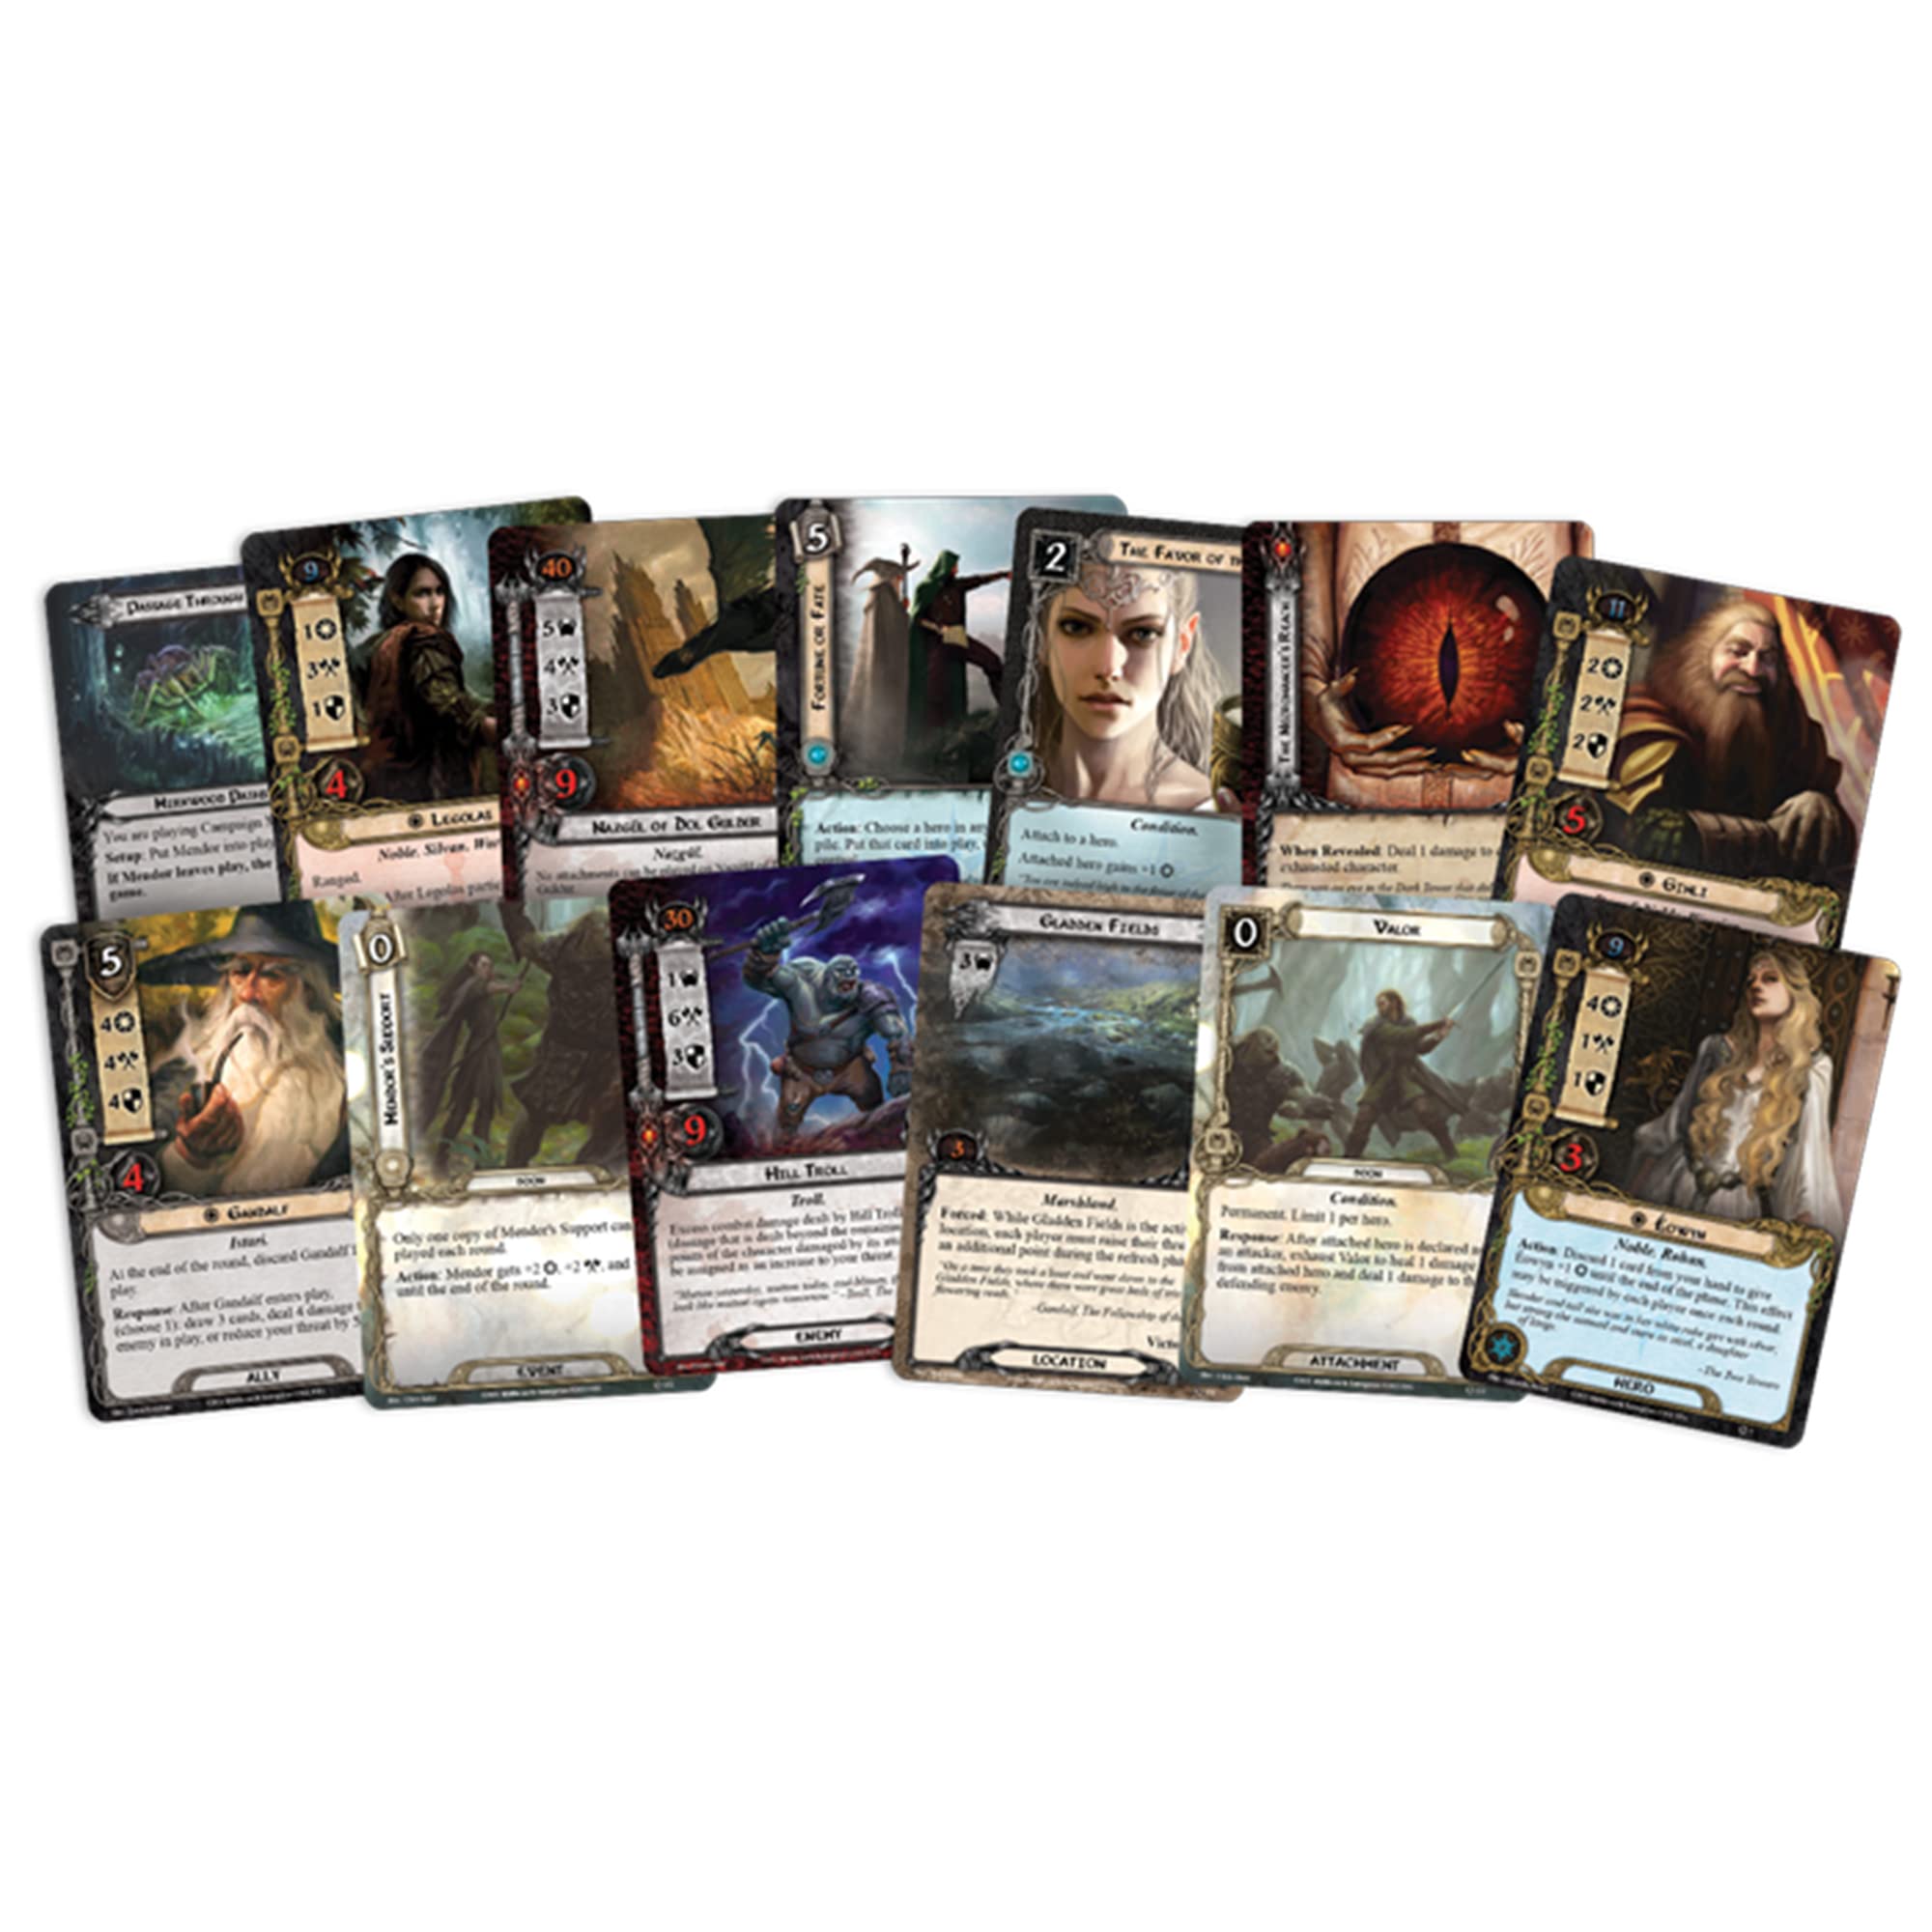 The Lord of the Rings: The Card Game Revised Core Set | Adventure/Cooperative Game for Adults and Teens | Ages 14+ | 1-4 Players | Average Playtime 30-120 Minutes | Made by Fantasy Flight Games